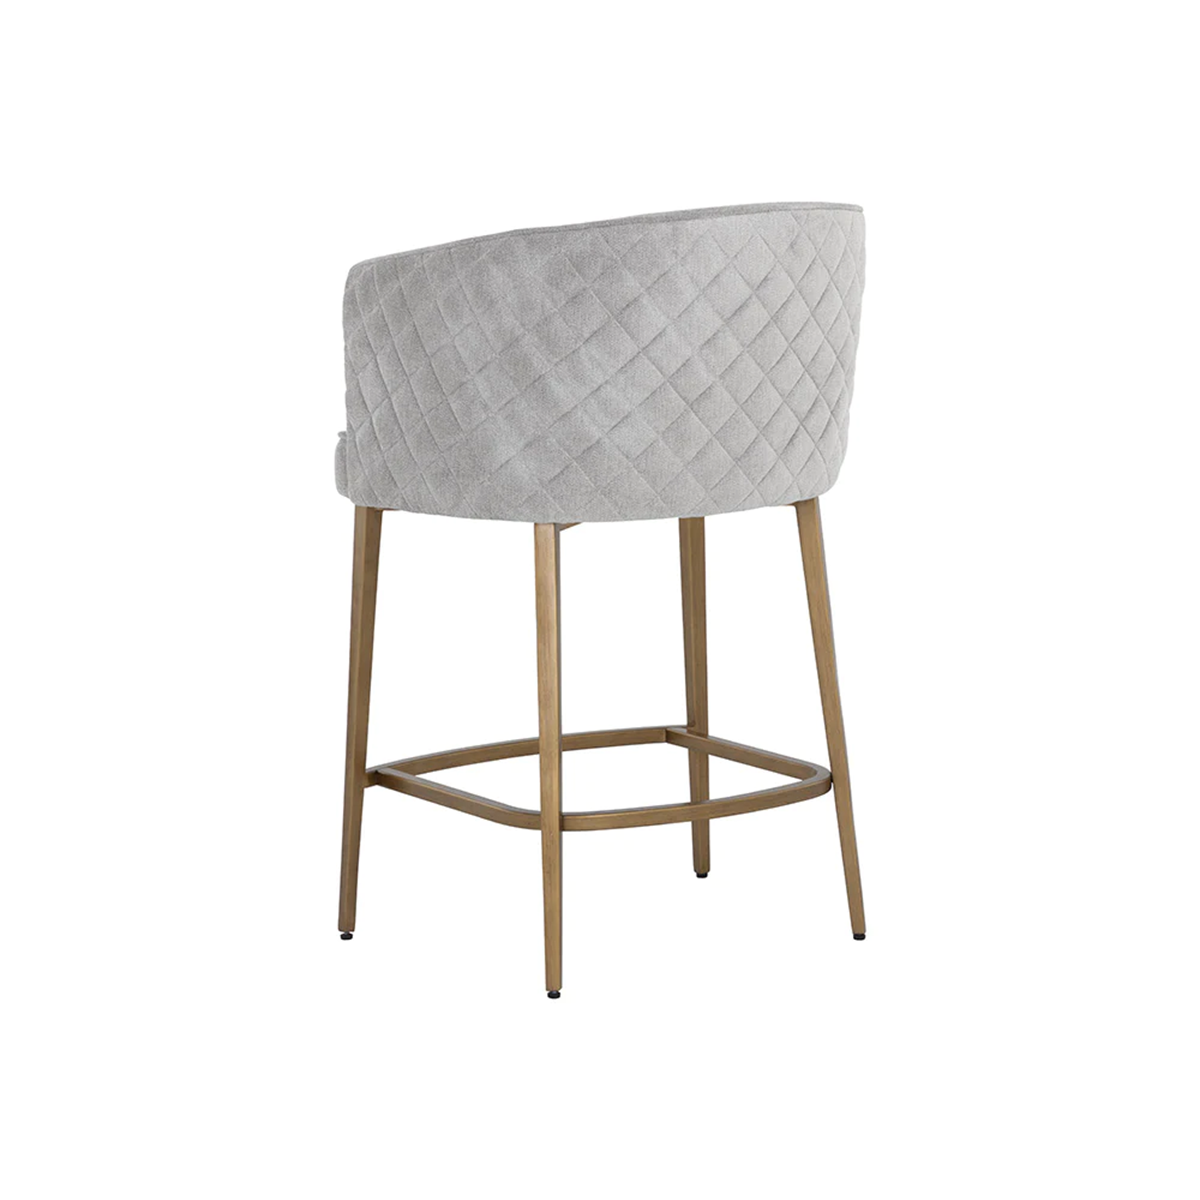 Cornella Counter Stool by Sunpan view from the back of the Stool